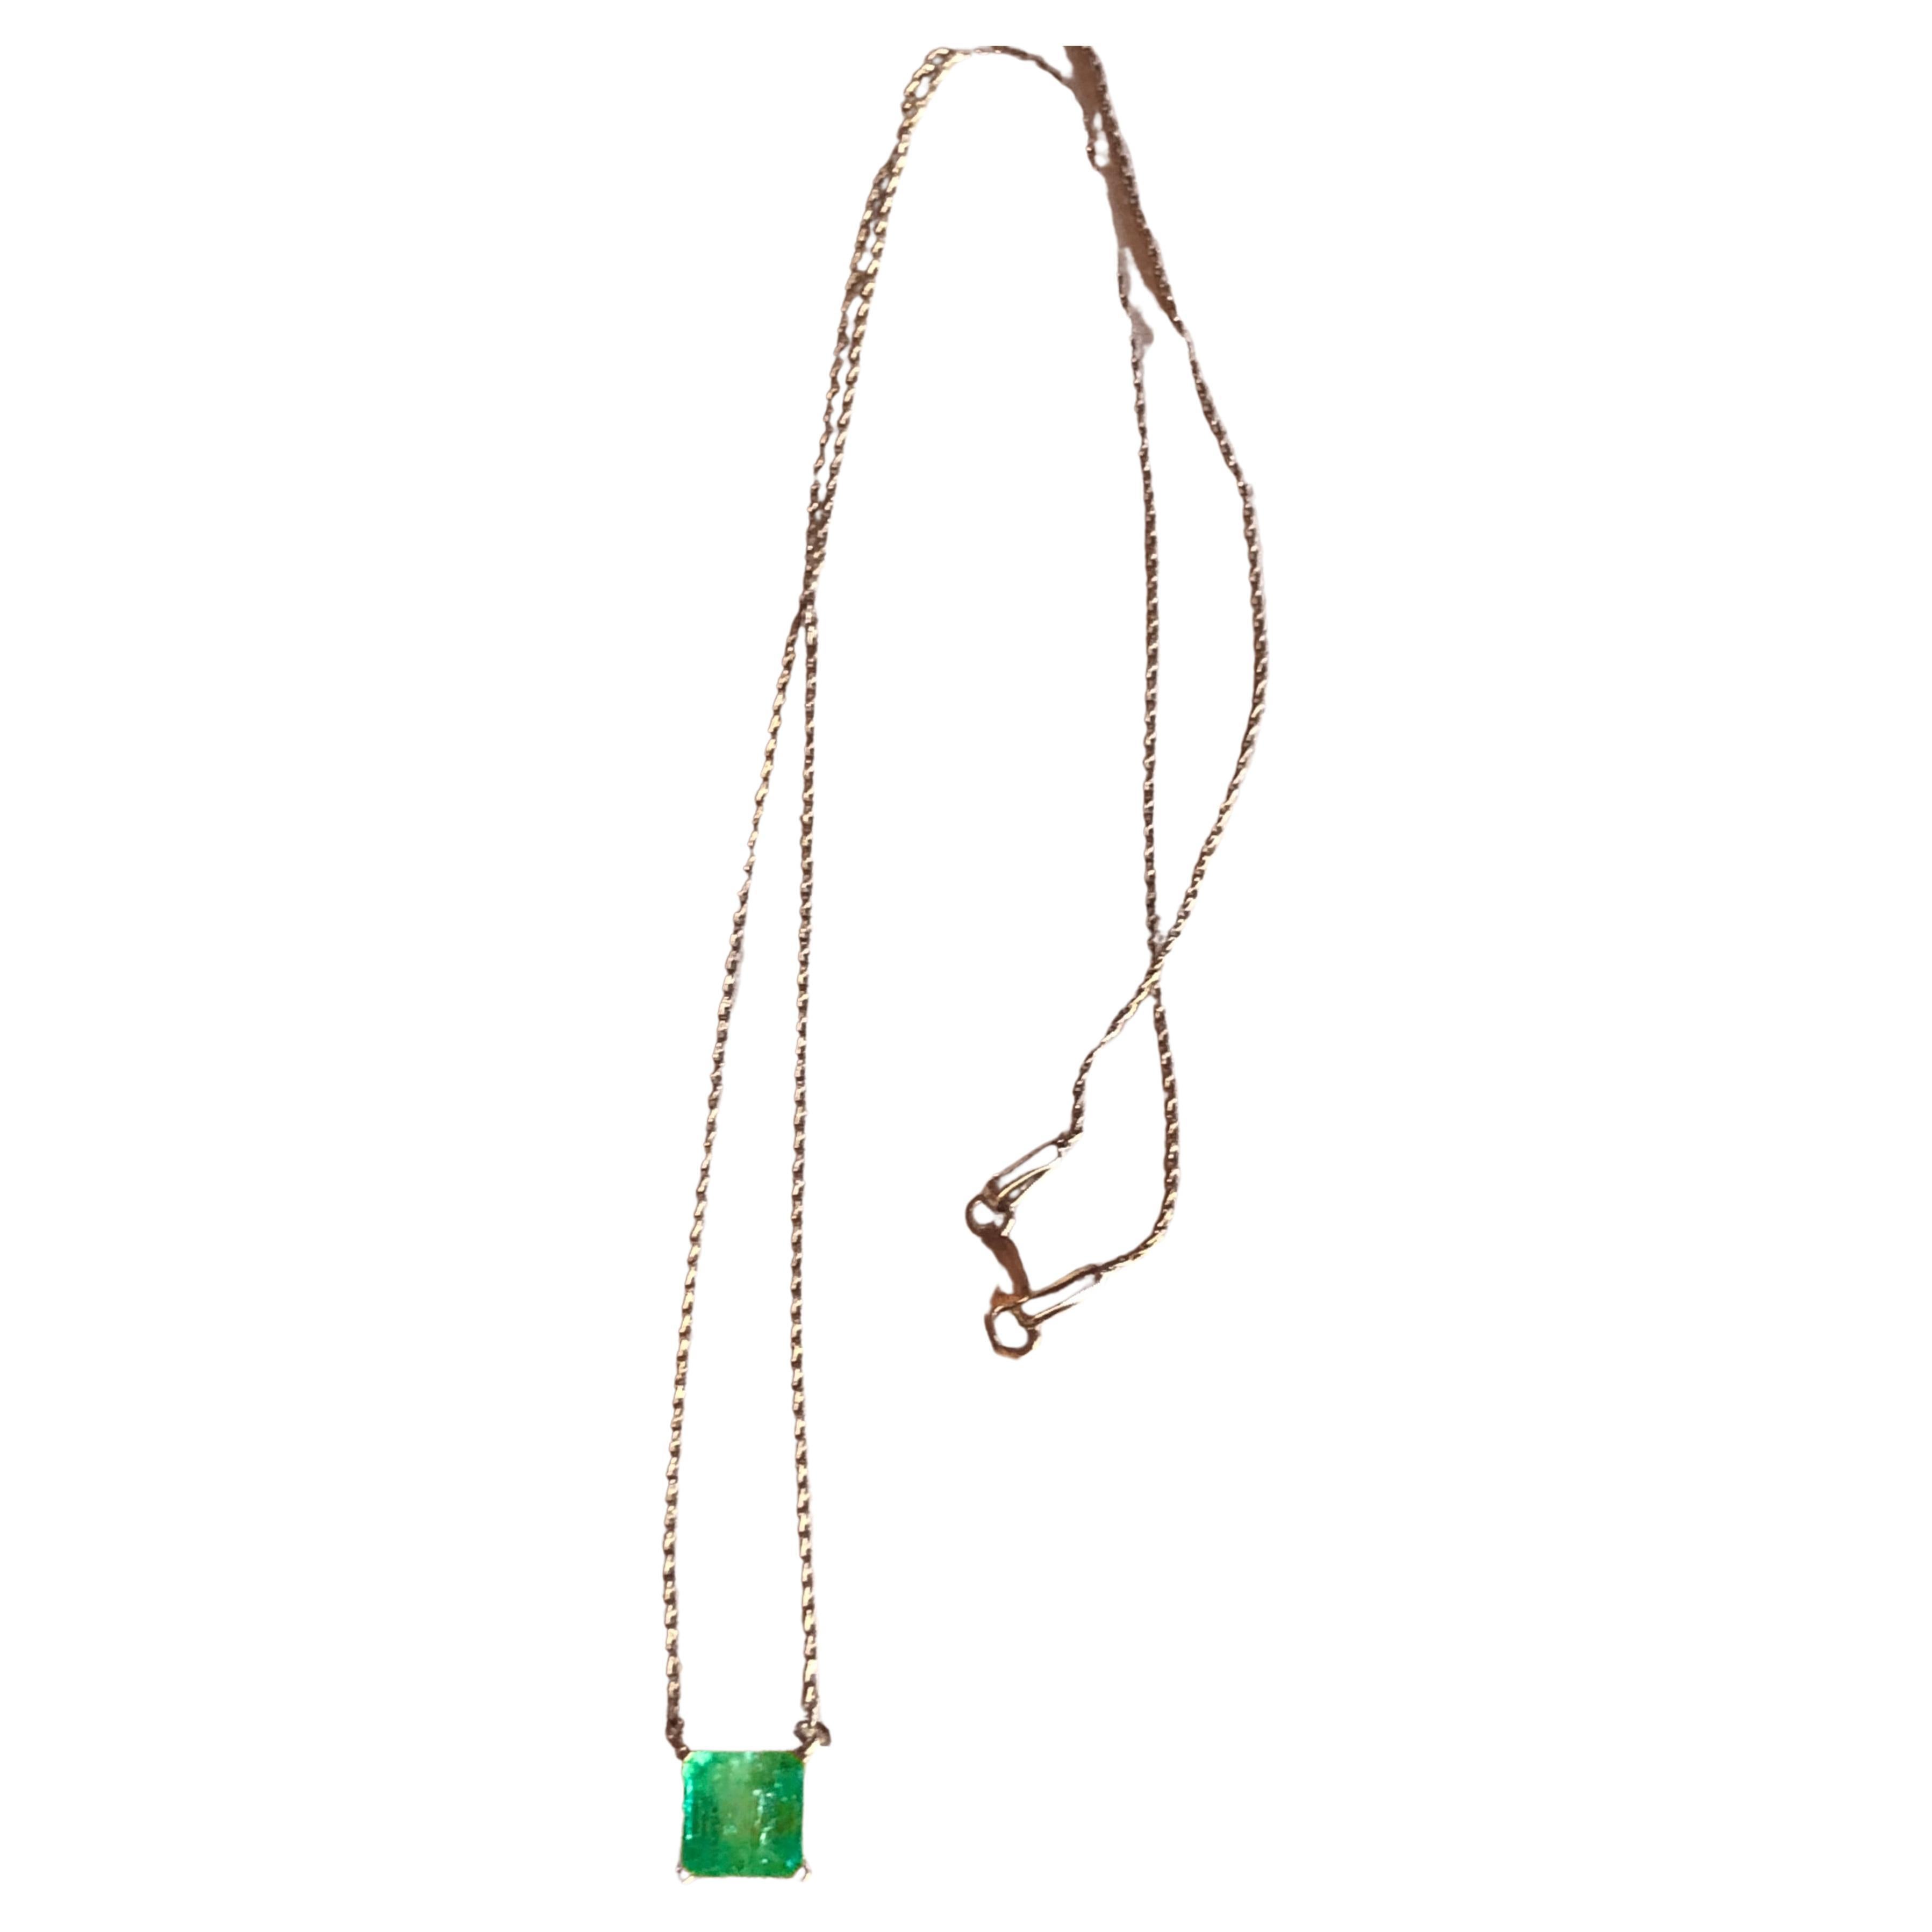 Square Cut Colombian Emerald Square Solitaire Pendant Drop Necklace in 14k For Sale